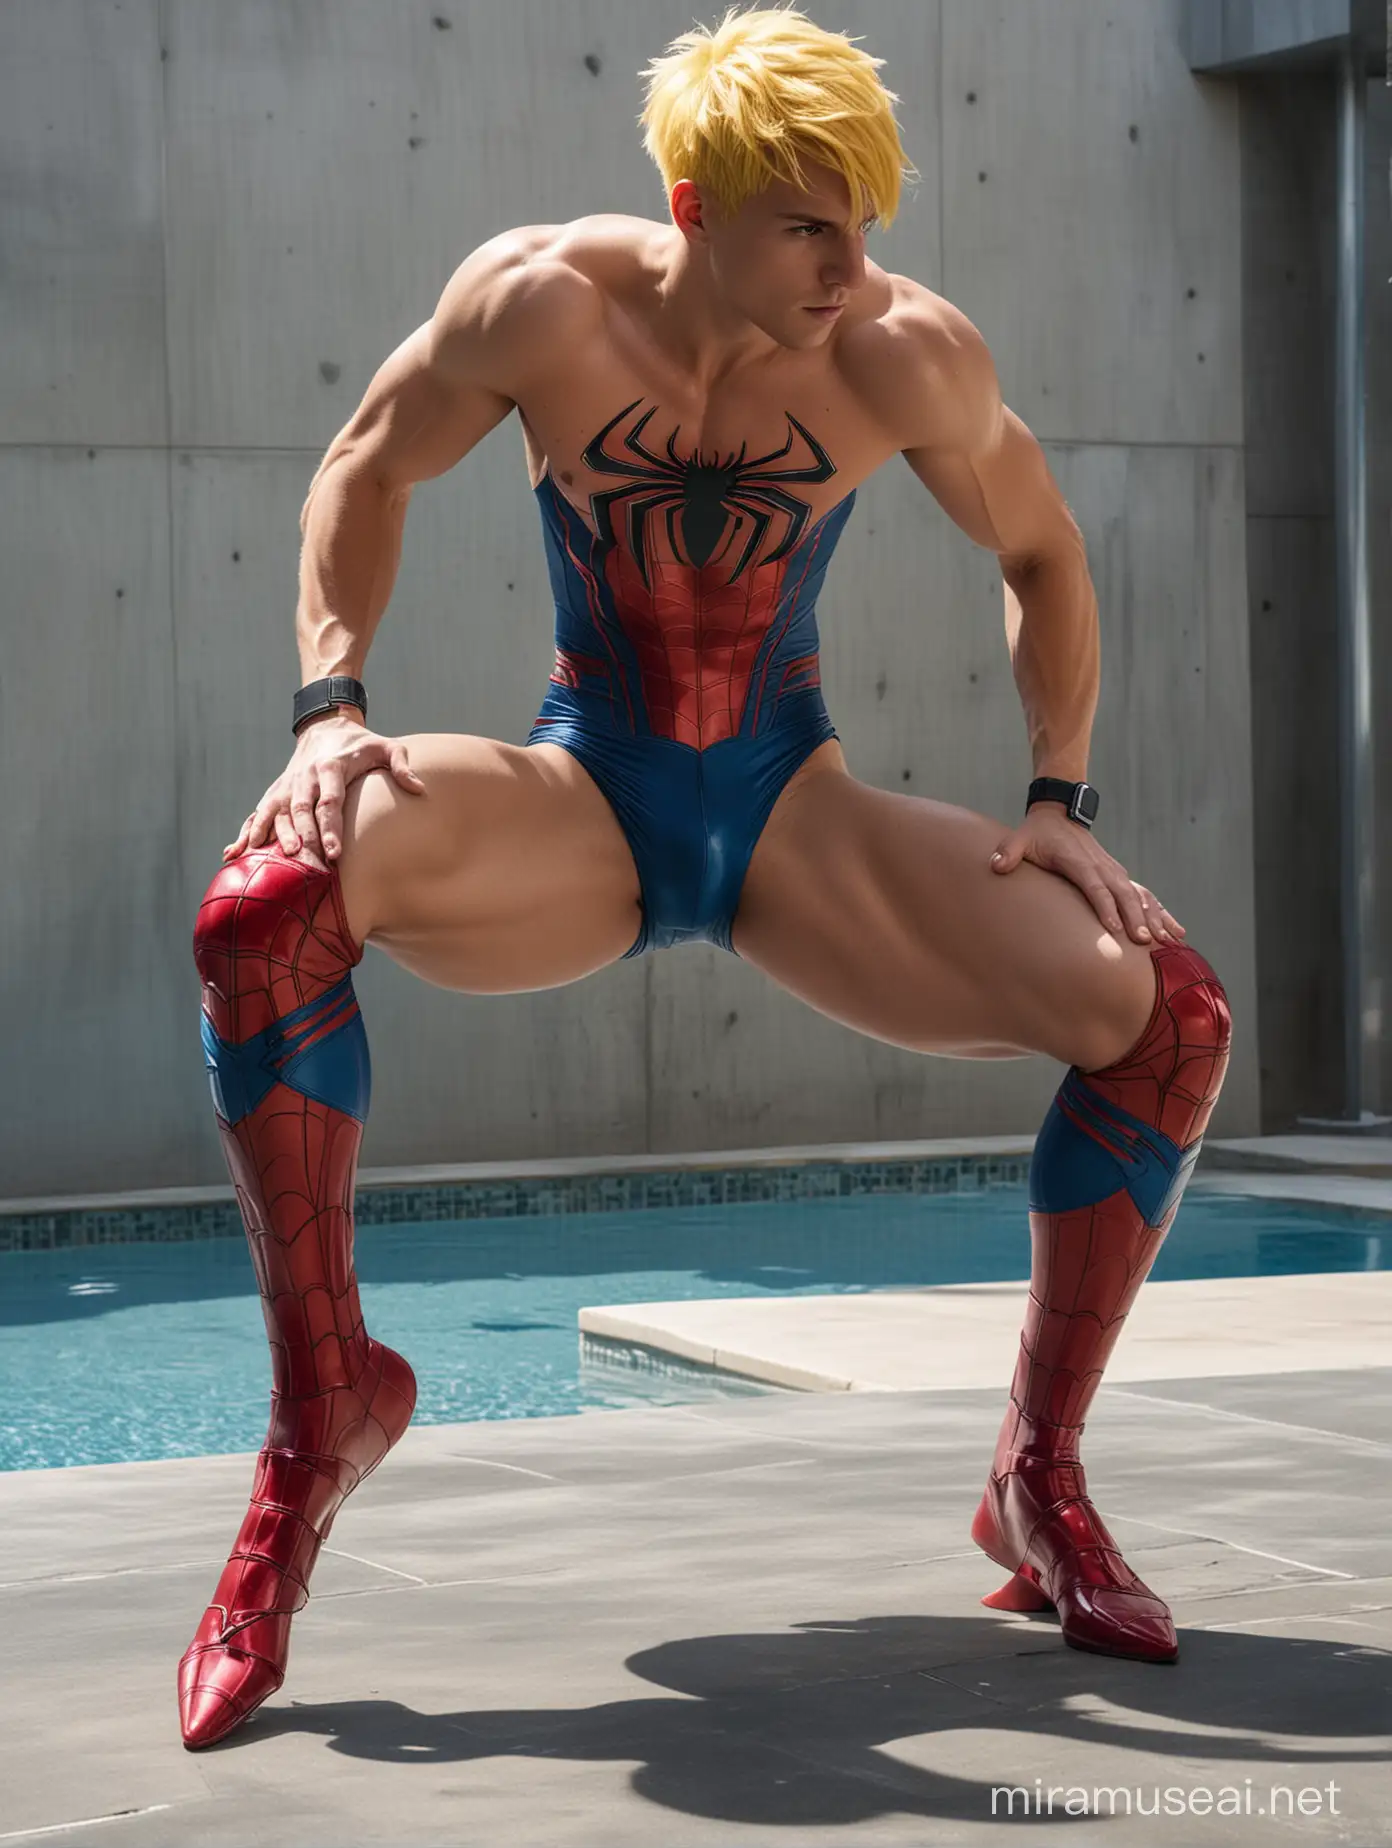 Futuristic Athletic Man by Poolside Sculpted Physique in Red and Blue Shorts